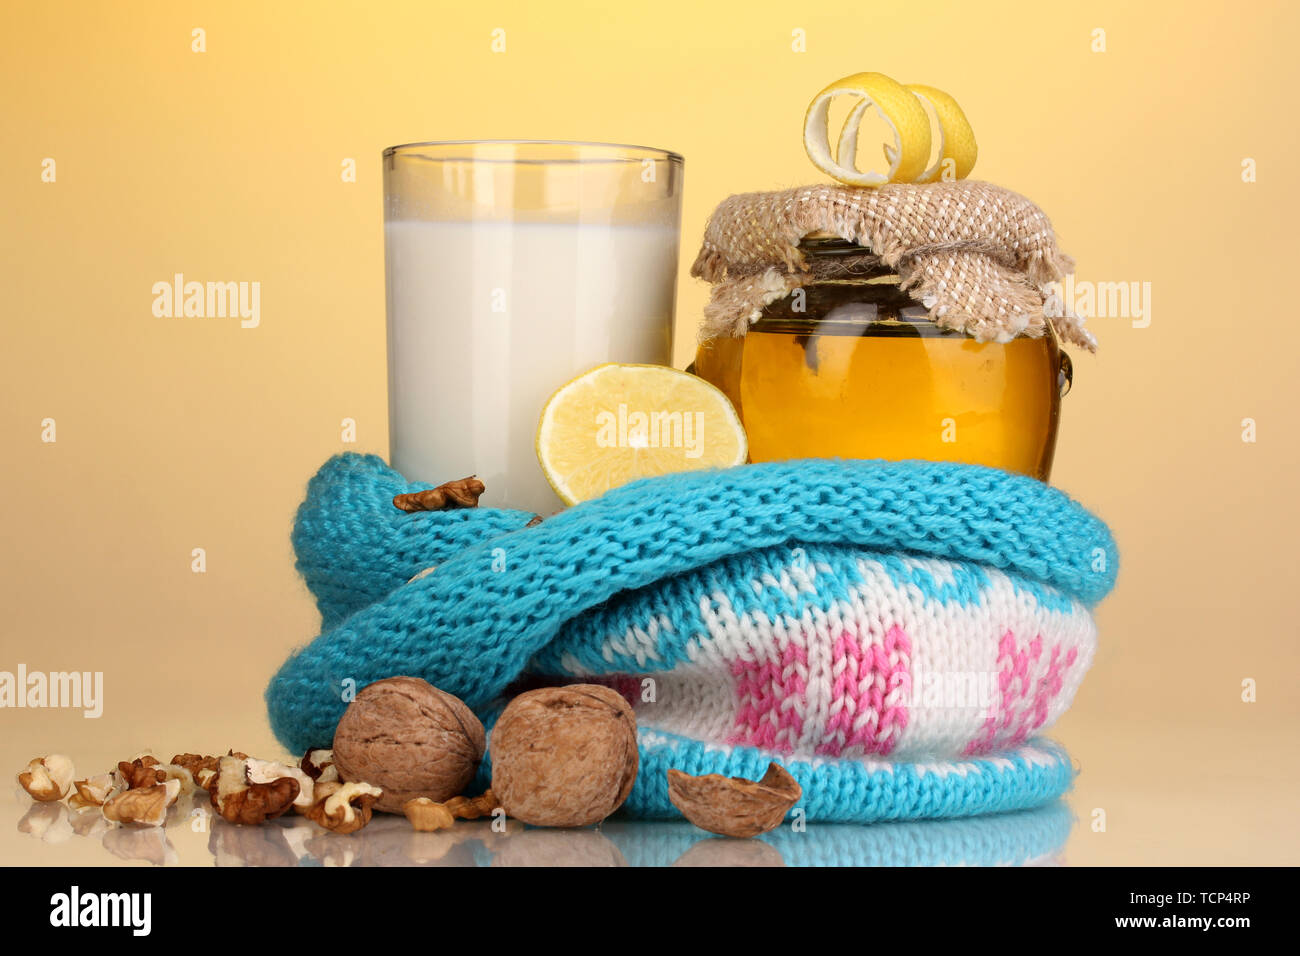 Healthy ingredients for strengthening immunity on yellow background Stock Photo